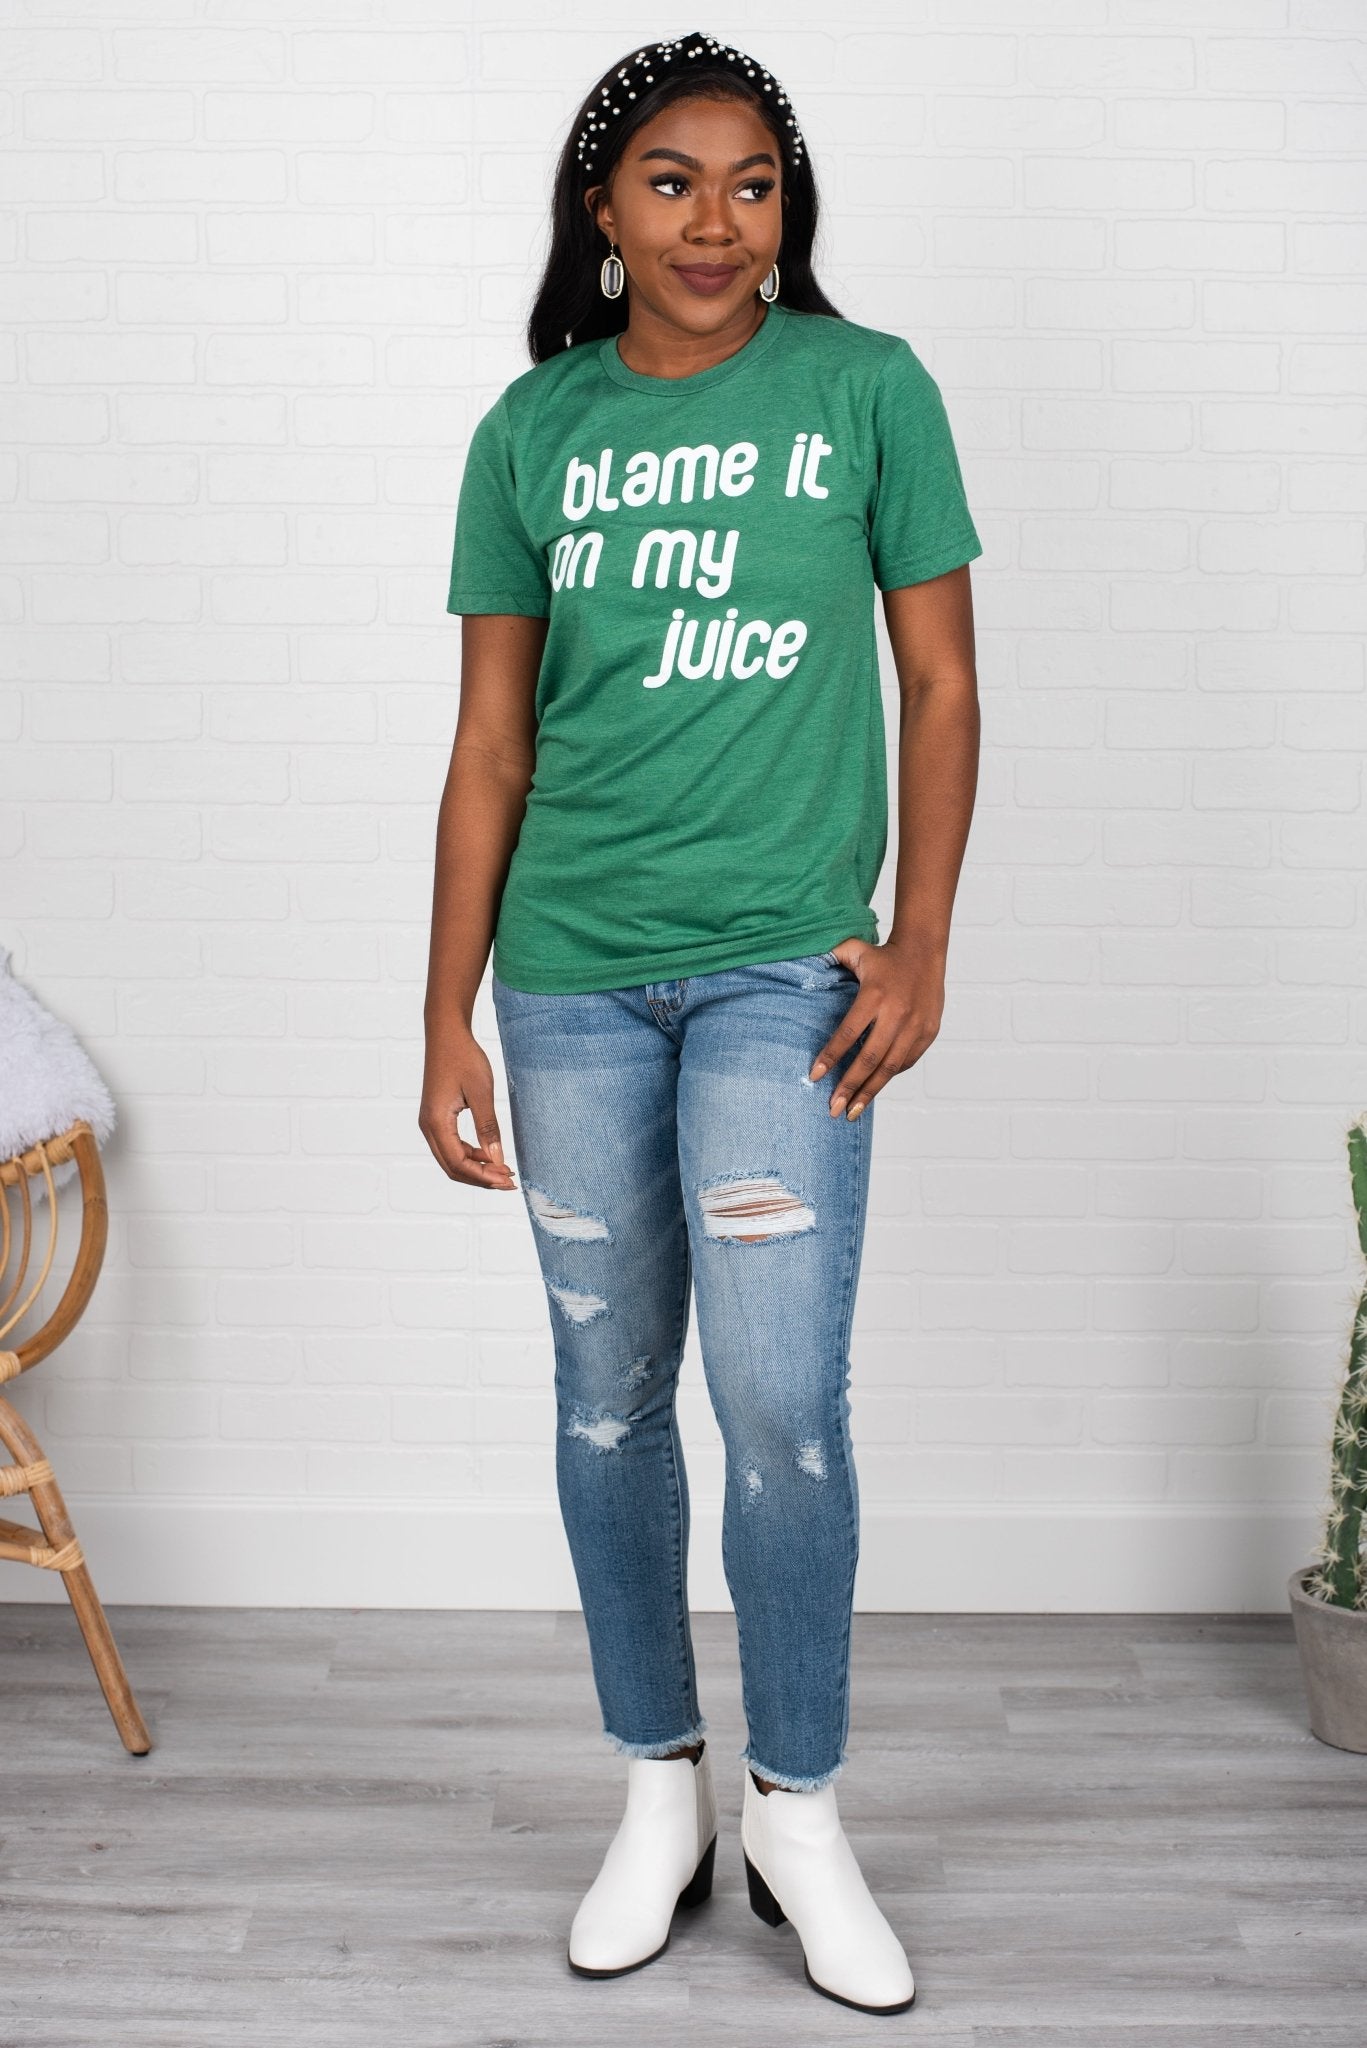 Blame it on my juice unisex short sleeve t-shirt green - Cute T-shirts - Funny T-Shirts at Lush Fashion Lounge Boutique in Oklahoma City